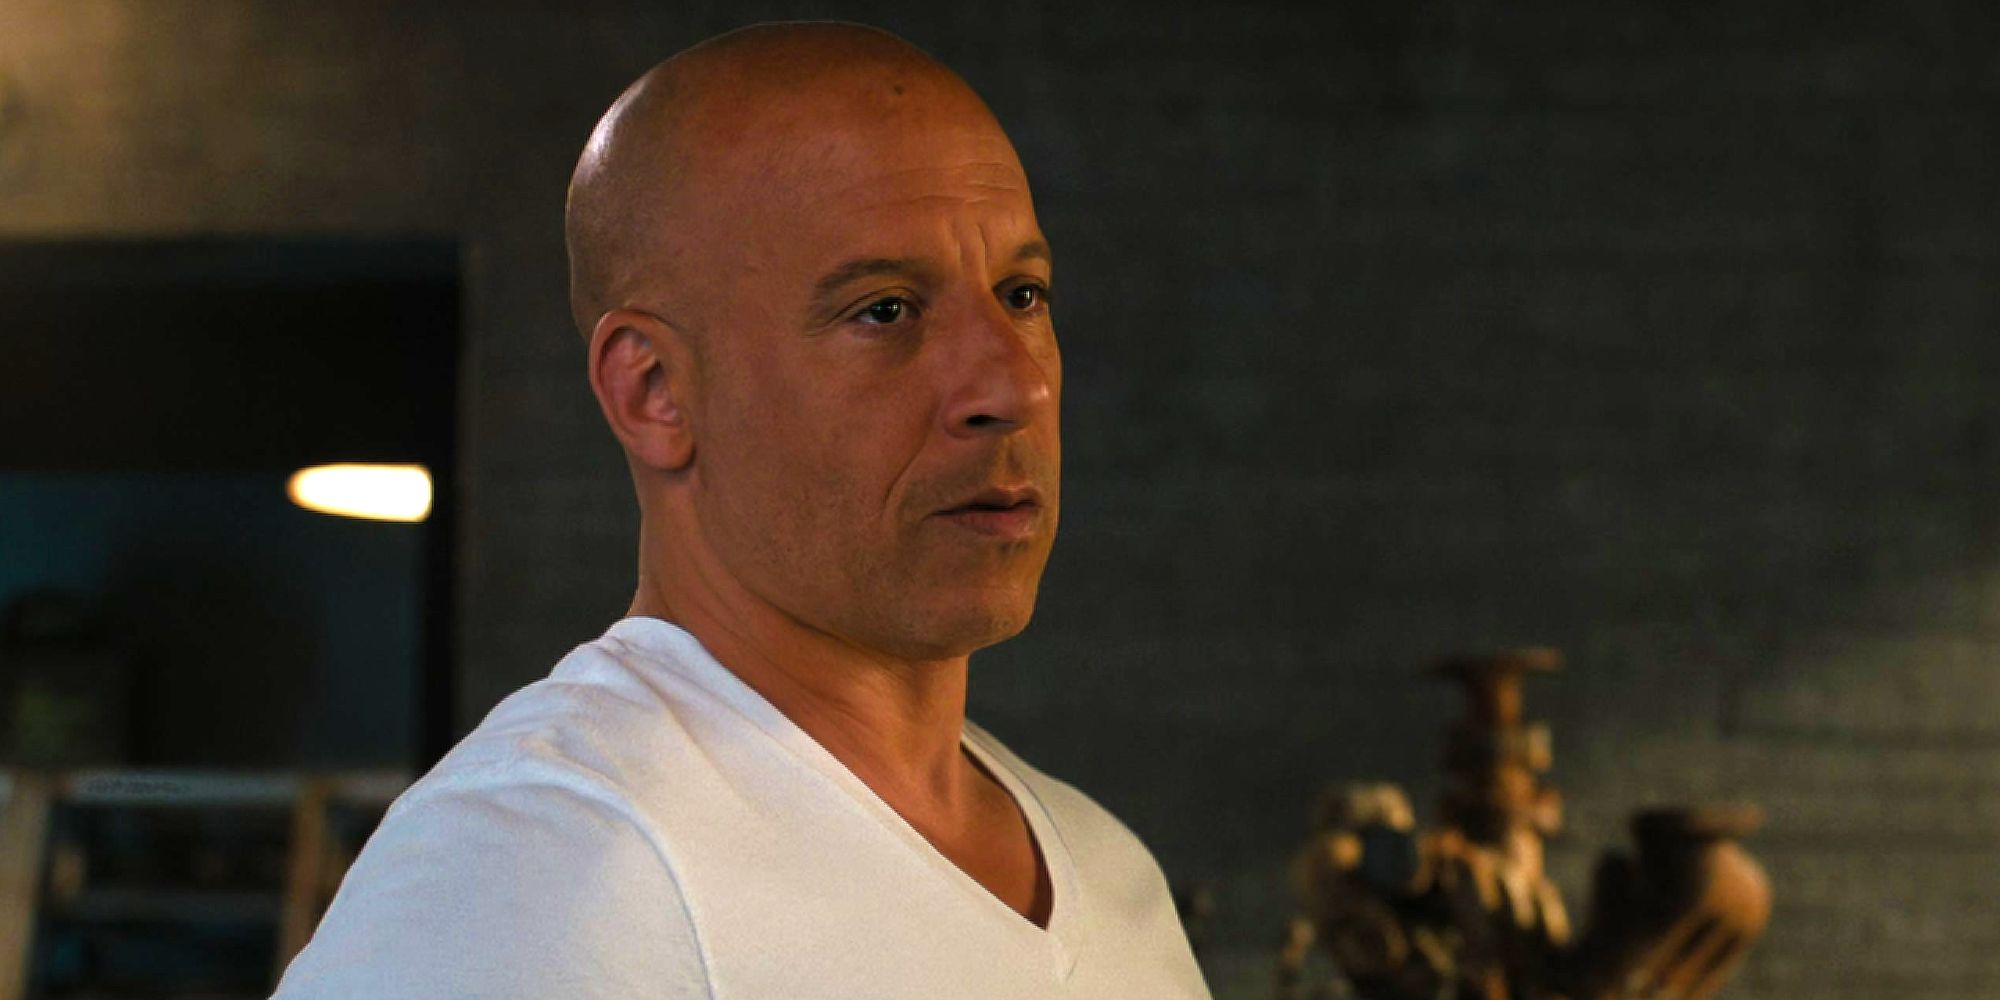 Vin Diesel as Dom Toretto wearing white shirt in F9